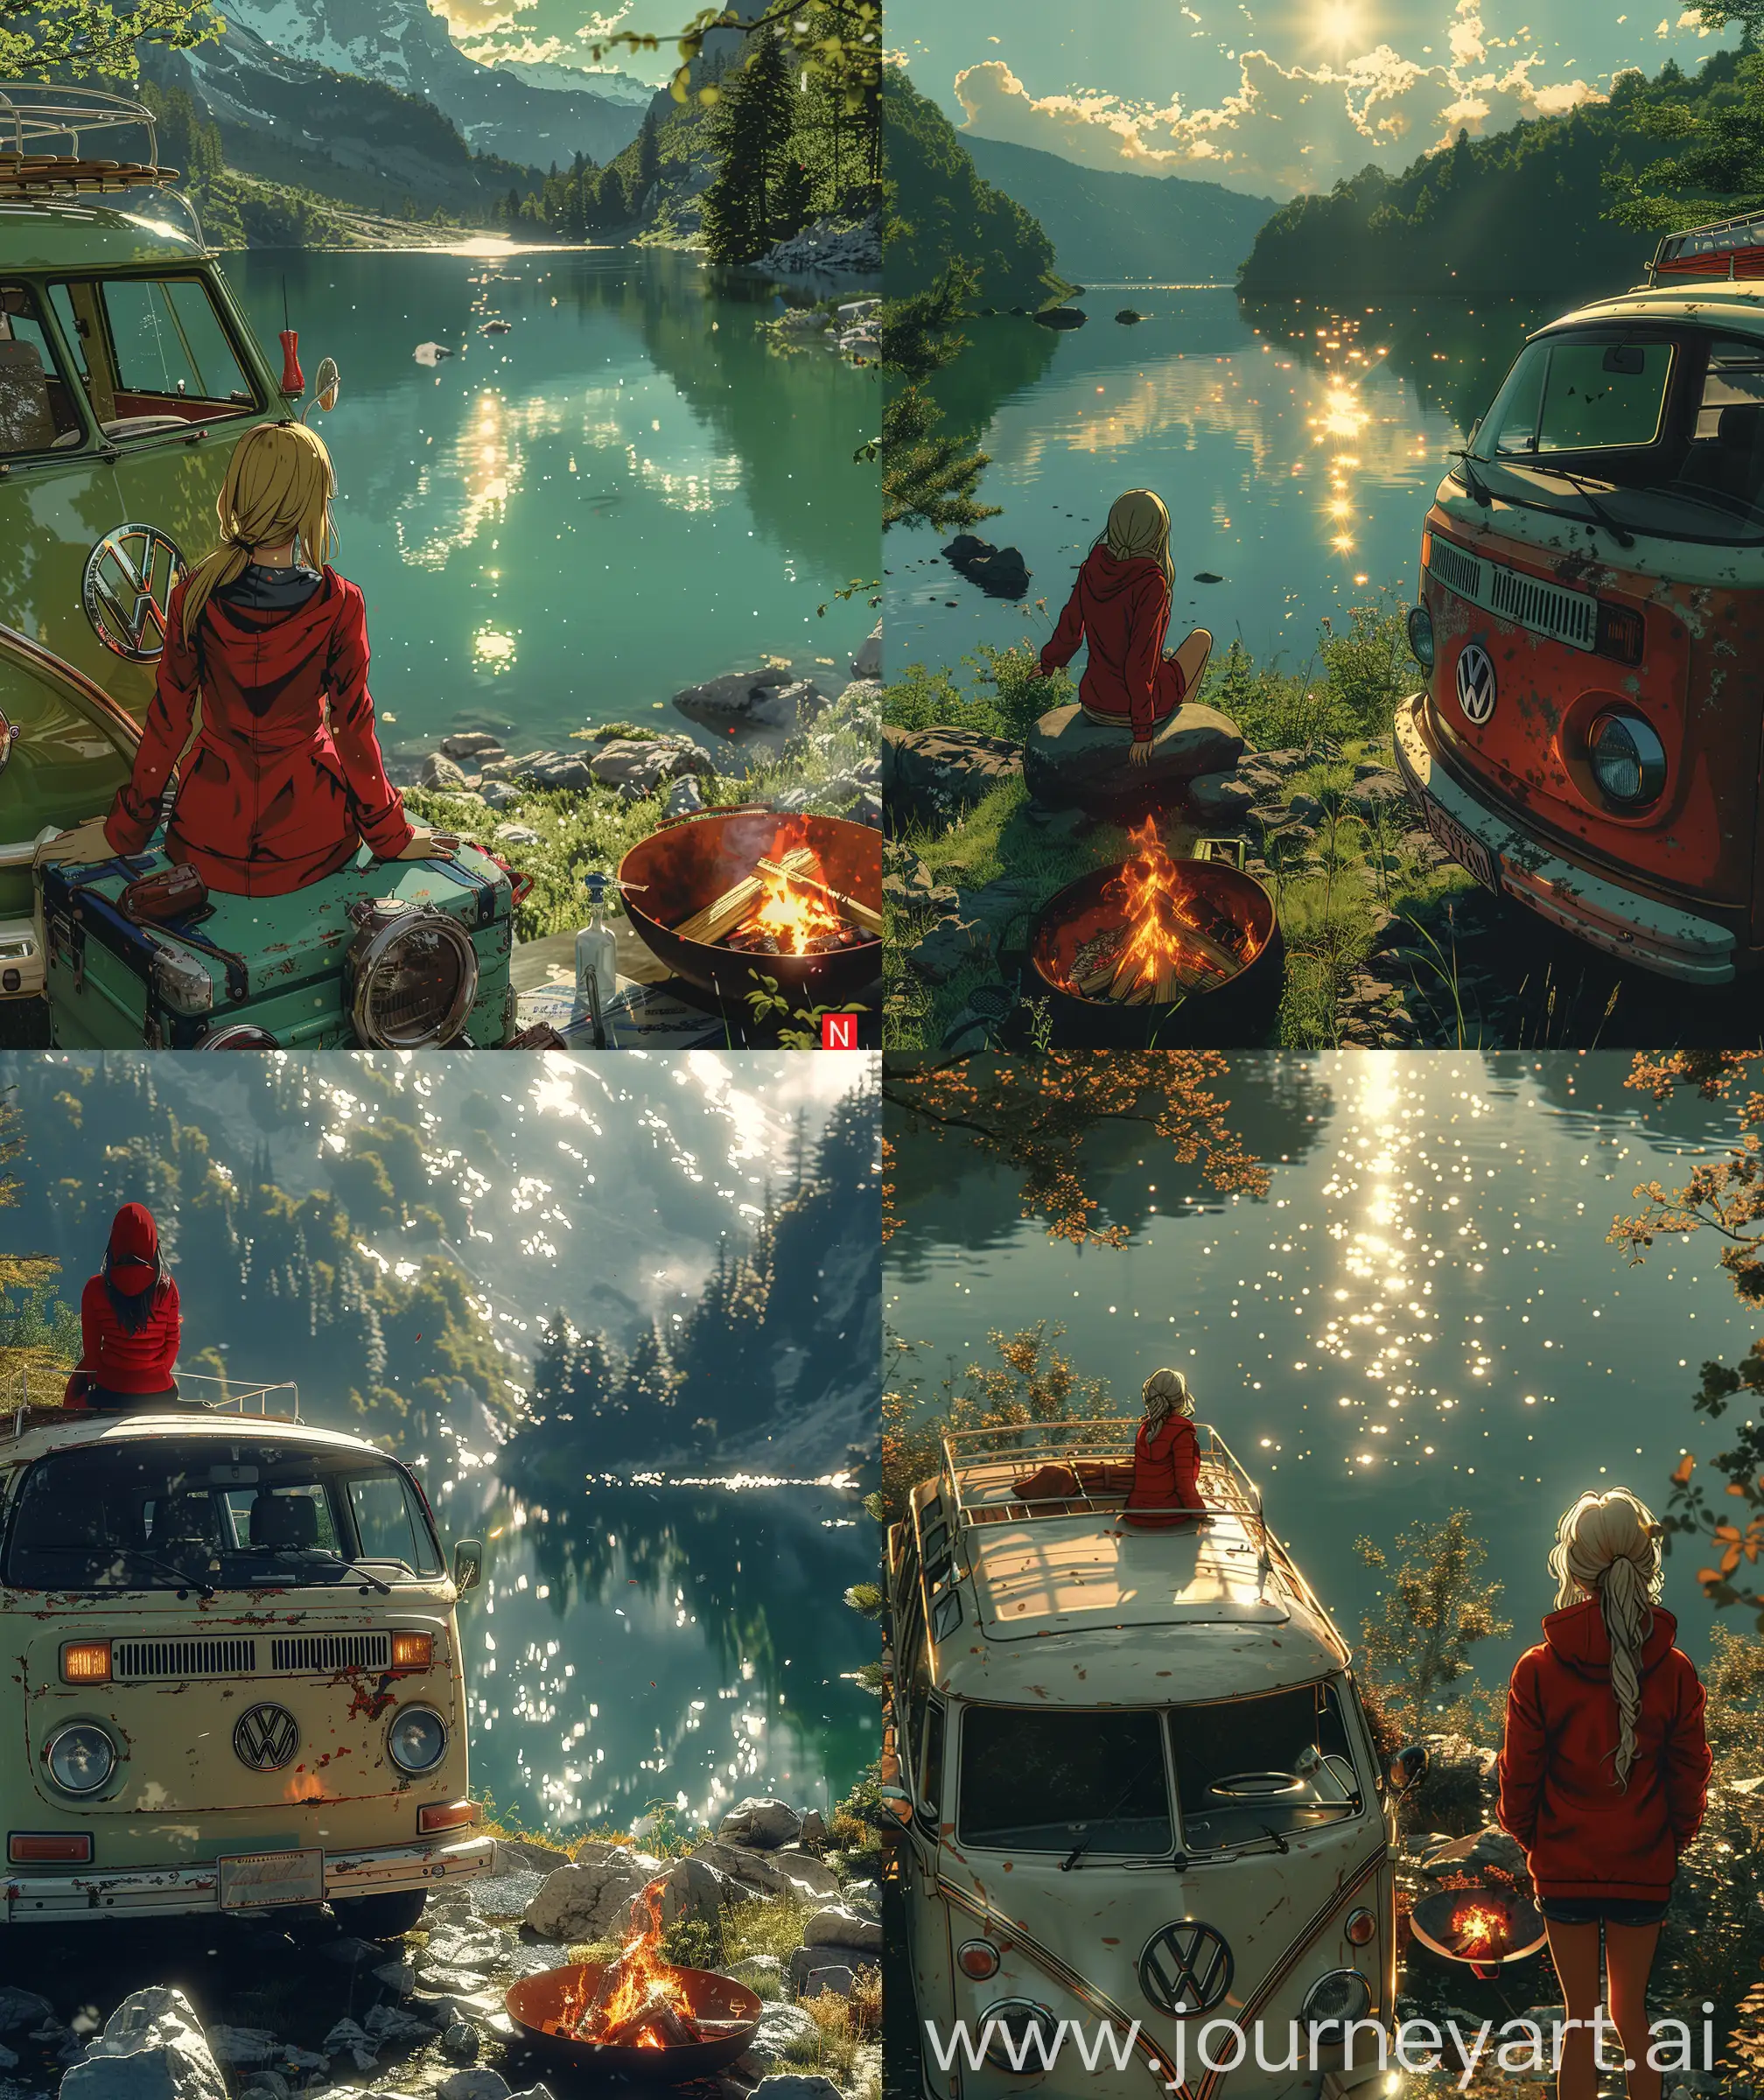 Vintage-Anime-Illustration-Woman-in-Red-Jacket-on-Volkswagen-Camping-Van-Rooftop-by-the-Lake